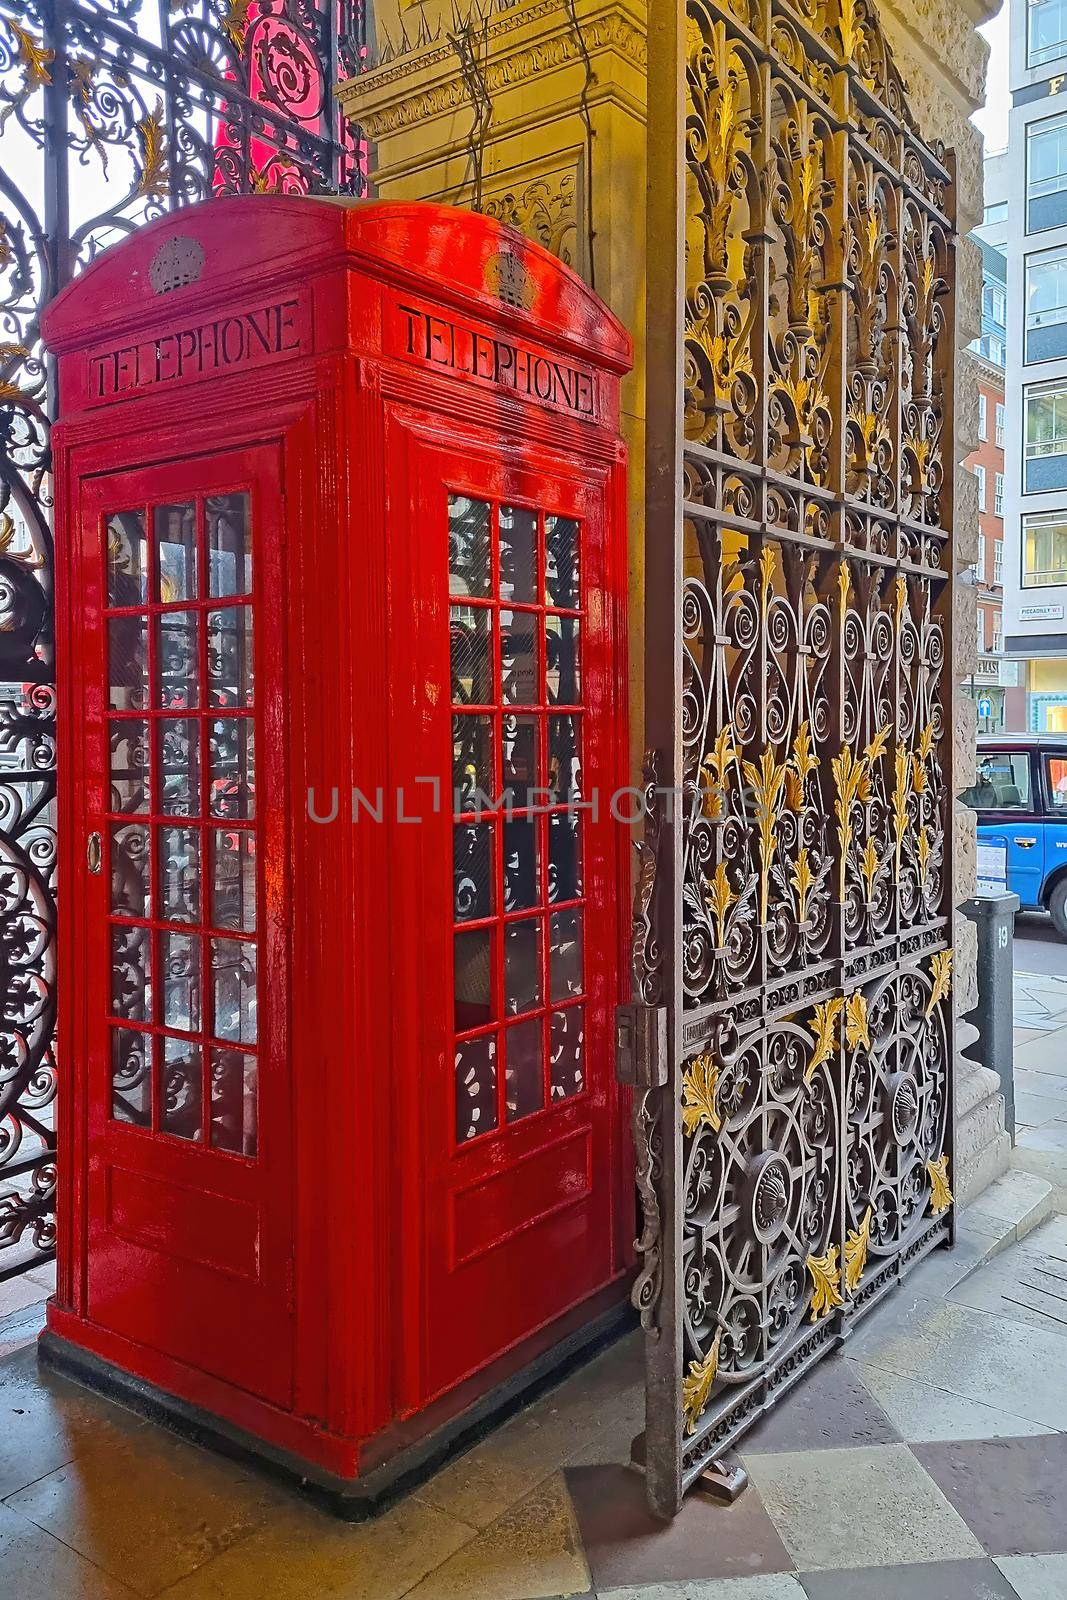 London, United Kingdom, February 6, 2022: the famous telephone booth on the streets of London